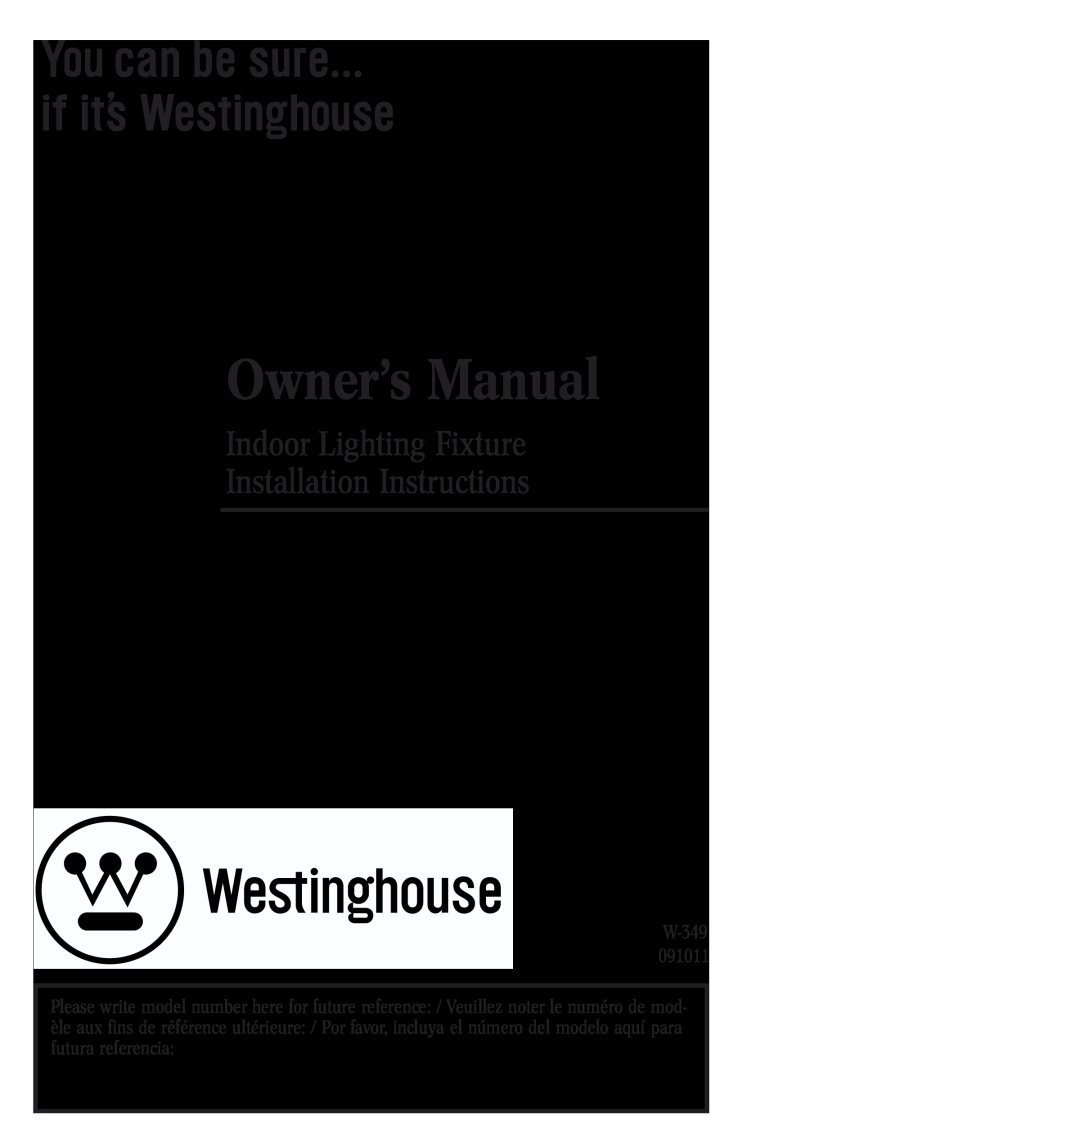 Westinghouse W-349 owner manual Indoor Lighting Fixture Installation Instructions 